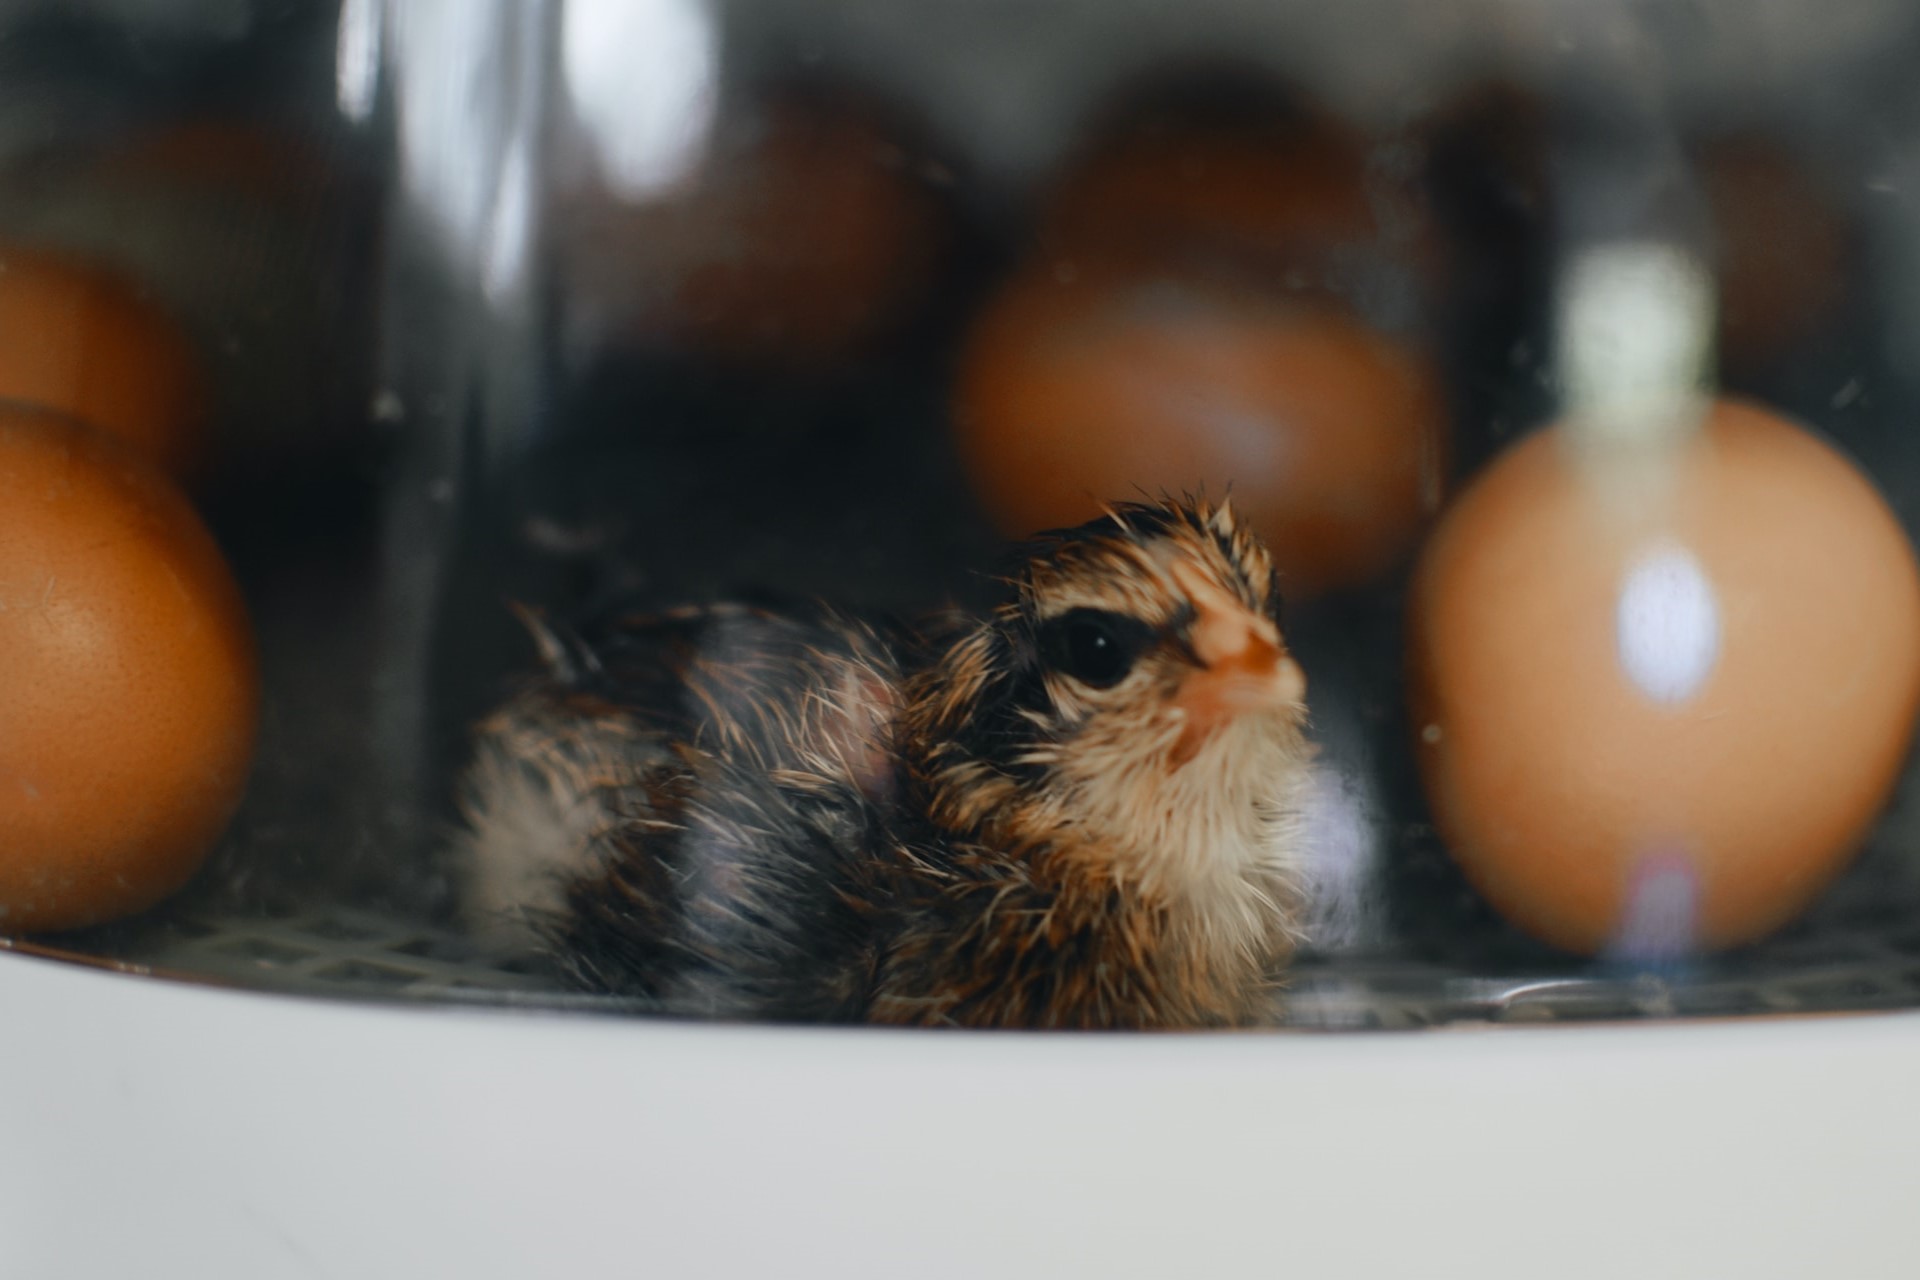 A freshly-hatched chick in an incubator.